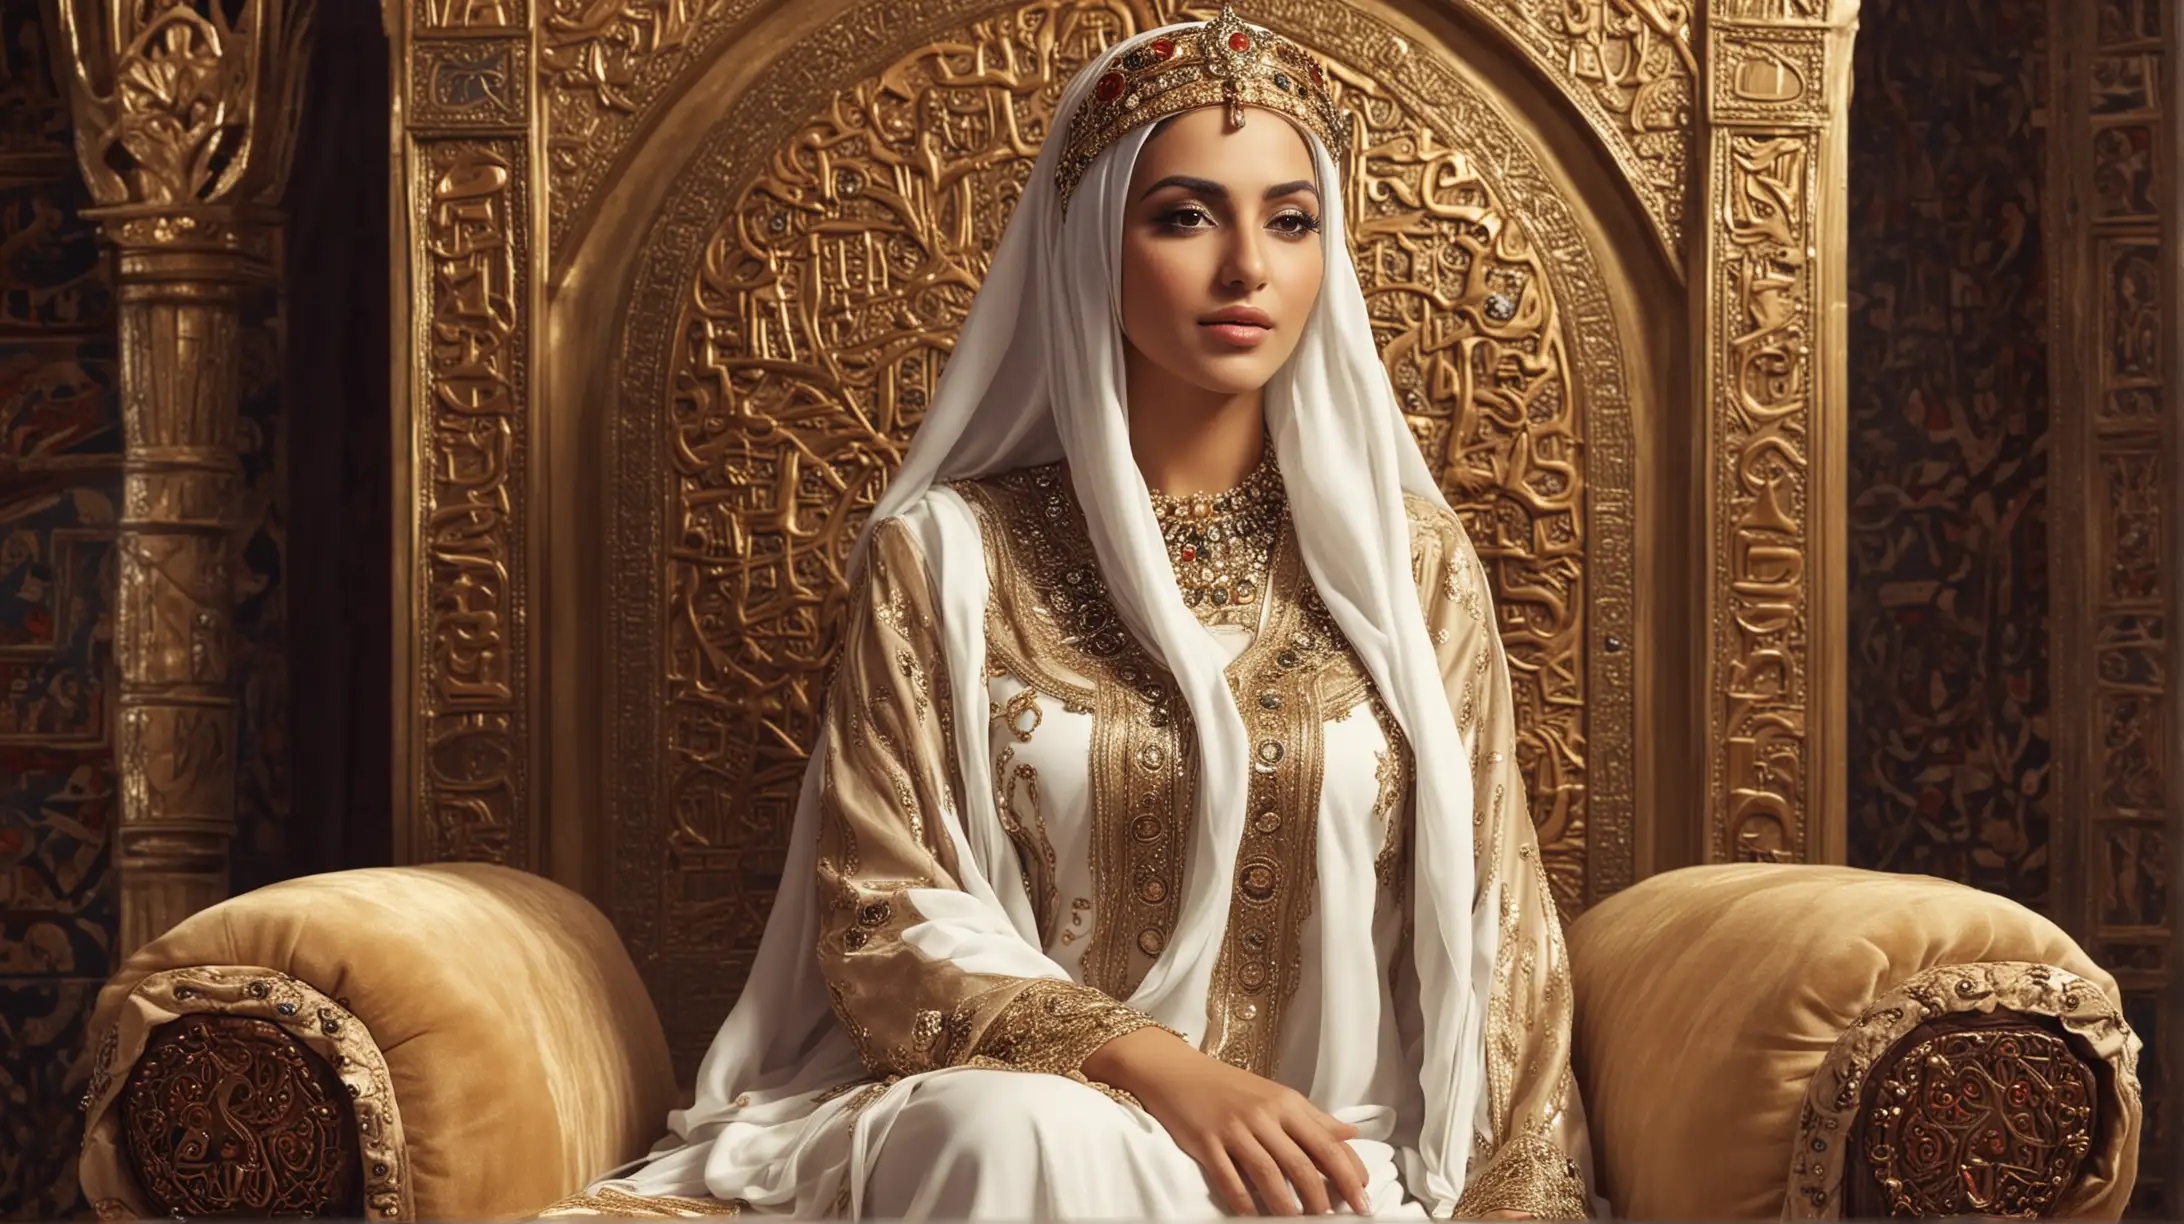 Regal Arab Queen Seated on Ornate Throne